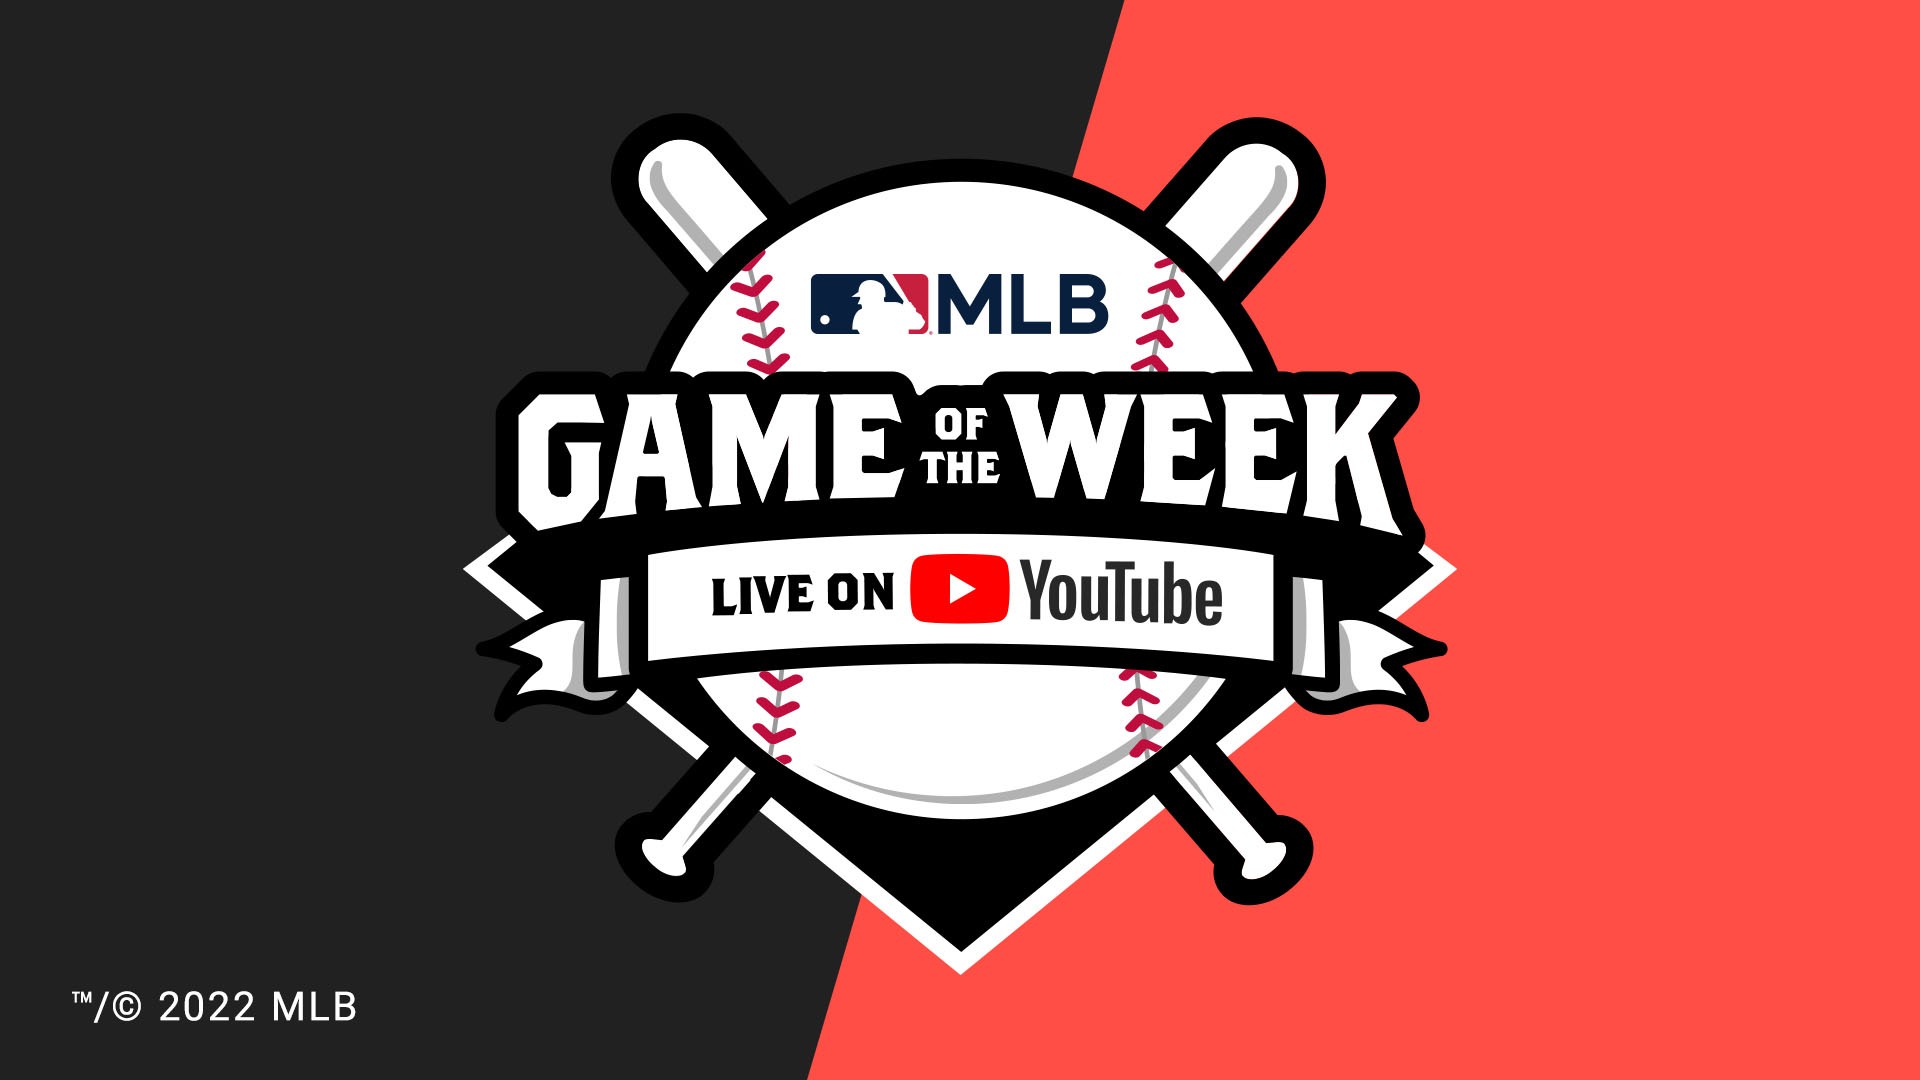 Watch upcoming Minor League games on MLBTV